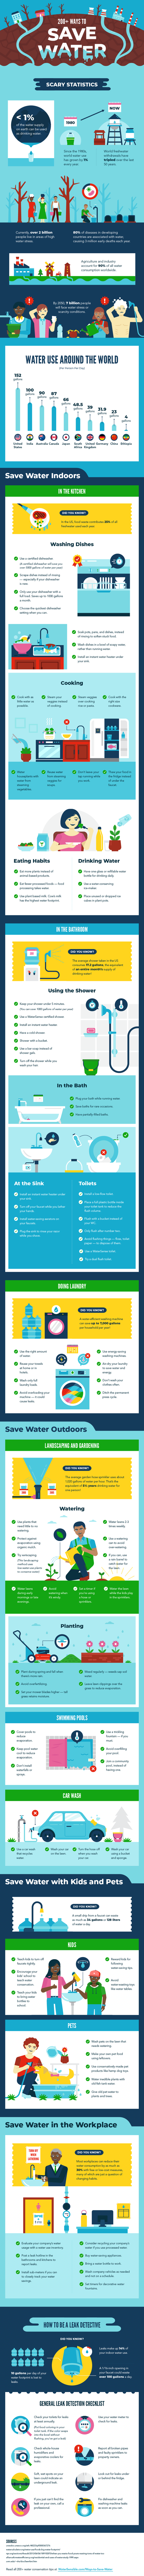 Infographic for 200+ Ways to Save Water: What You Need To Know